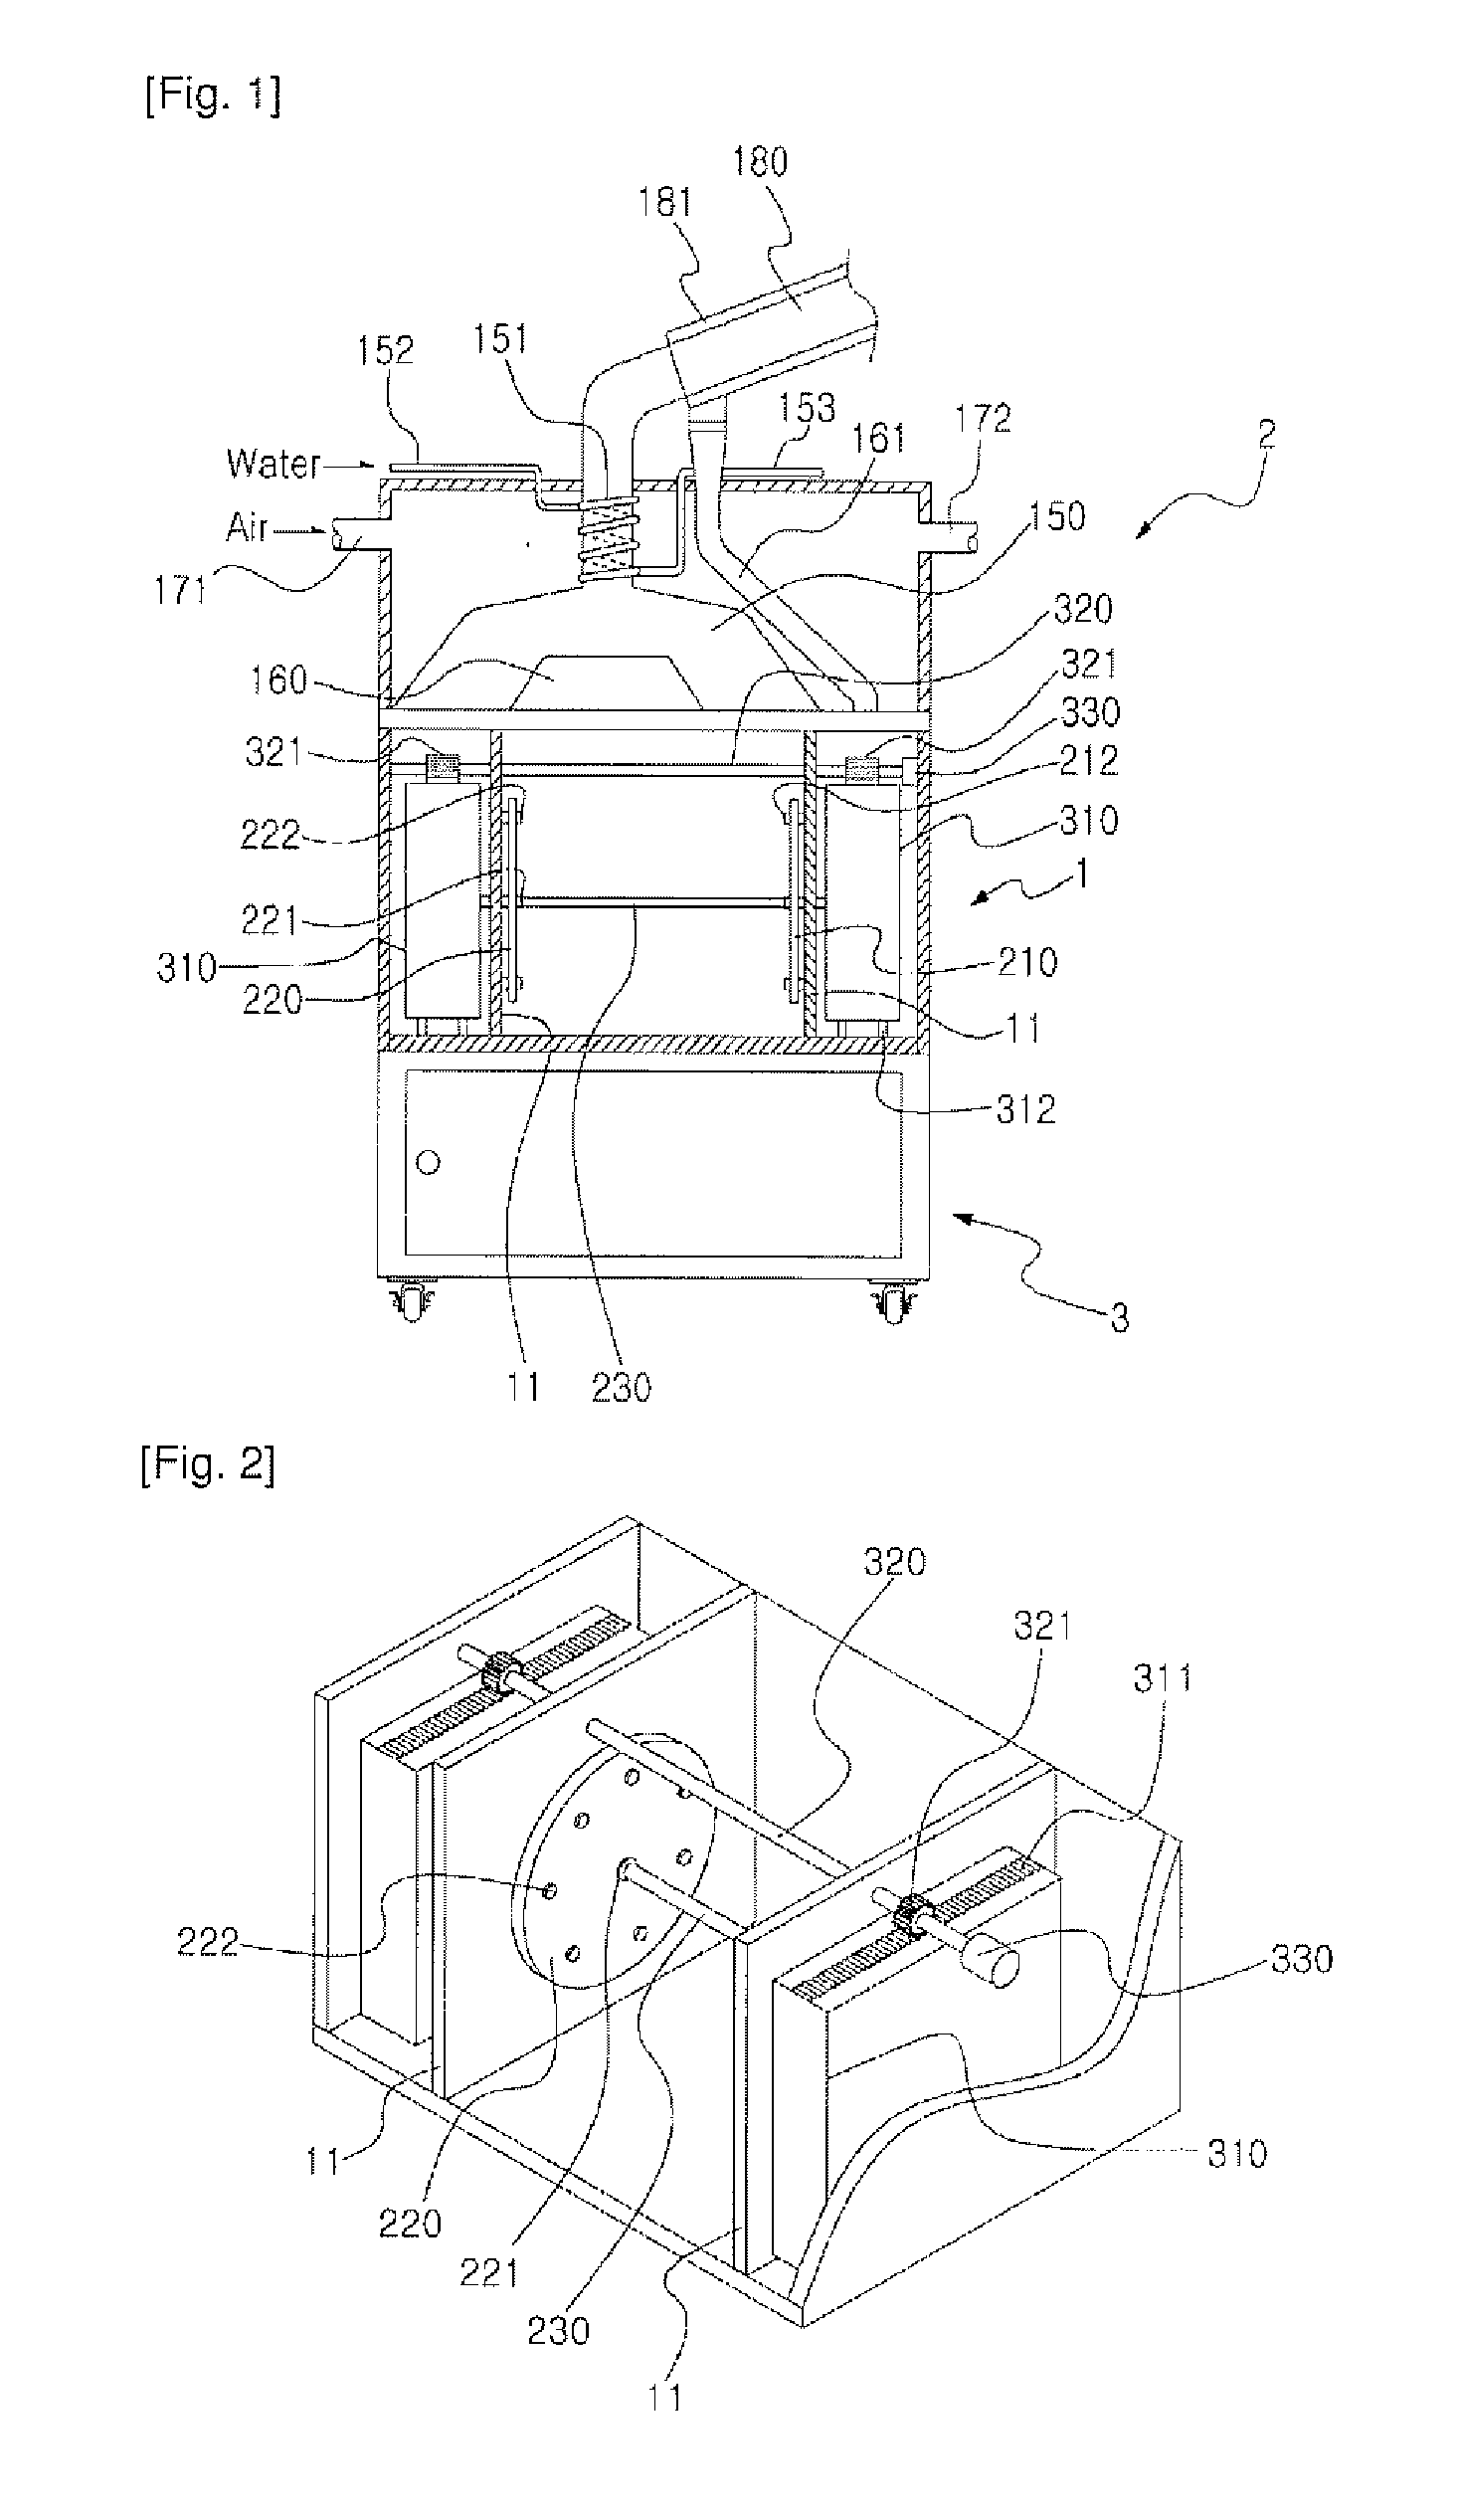 Rotary barbecue device